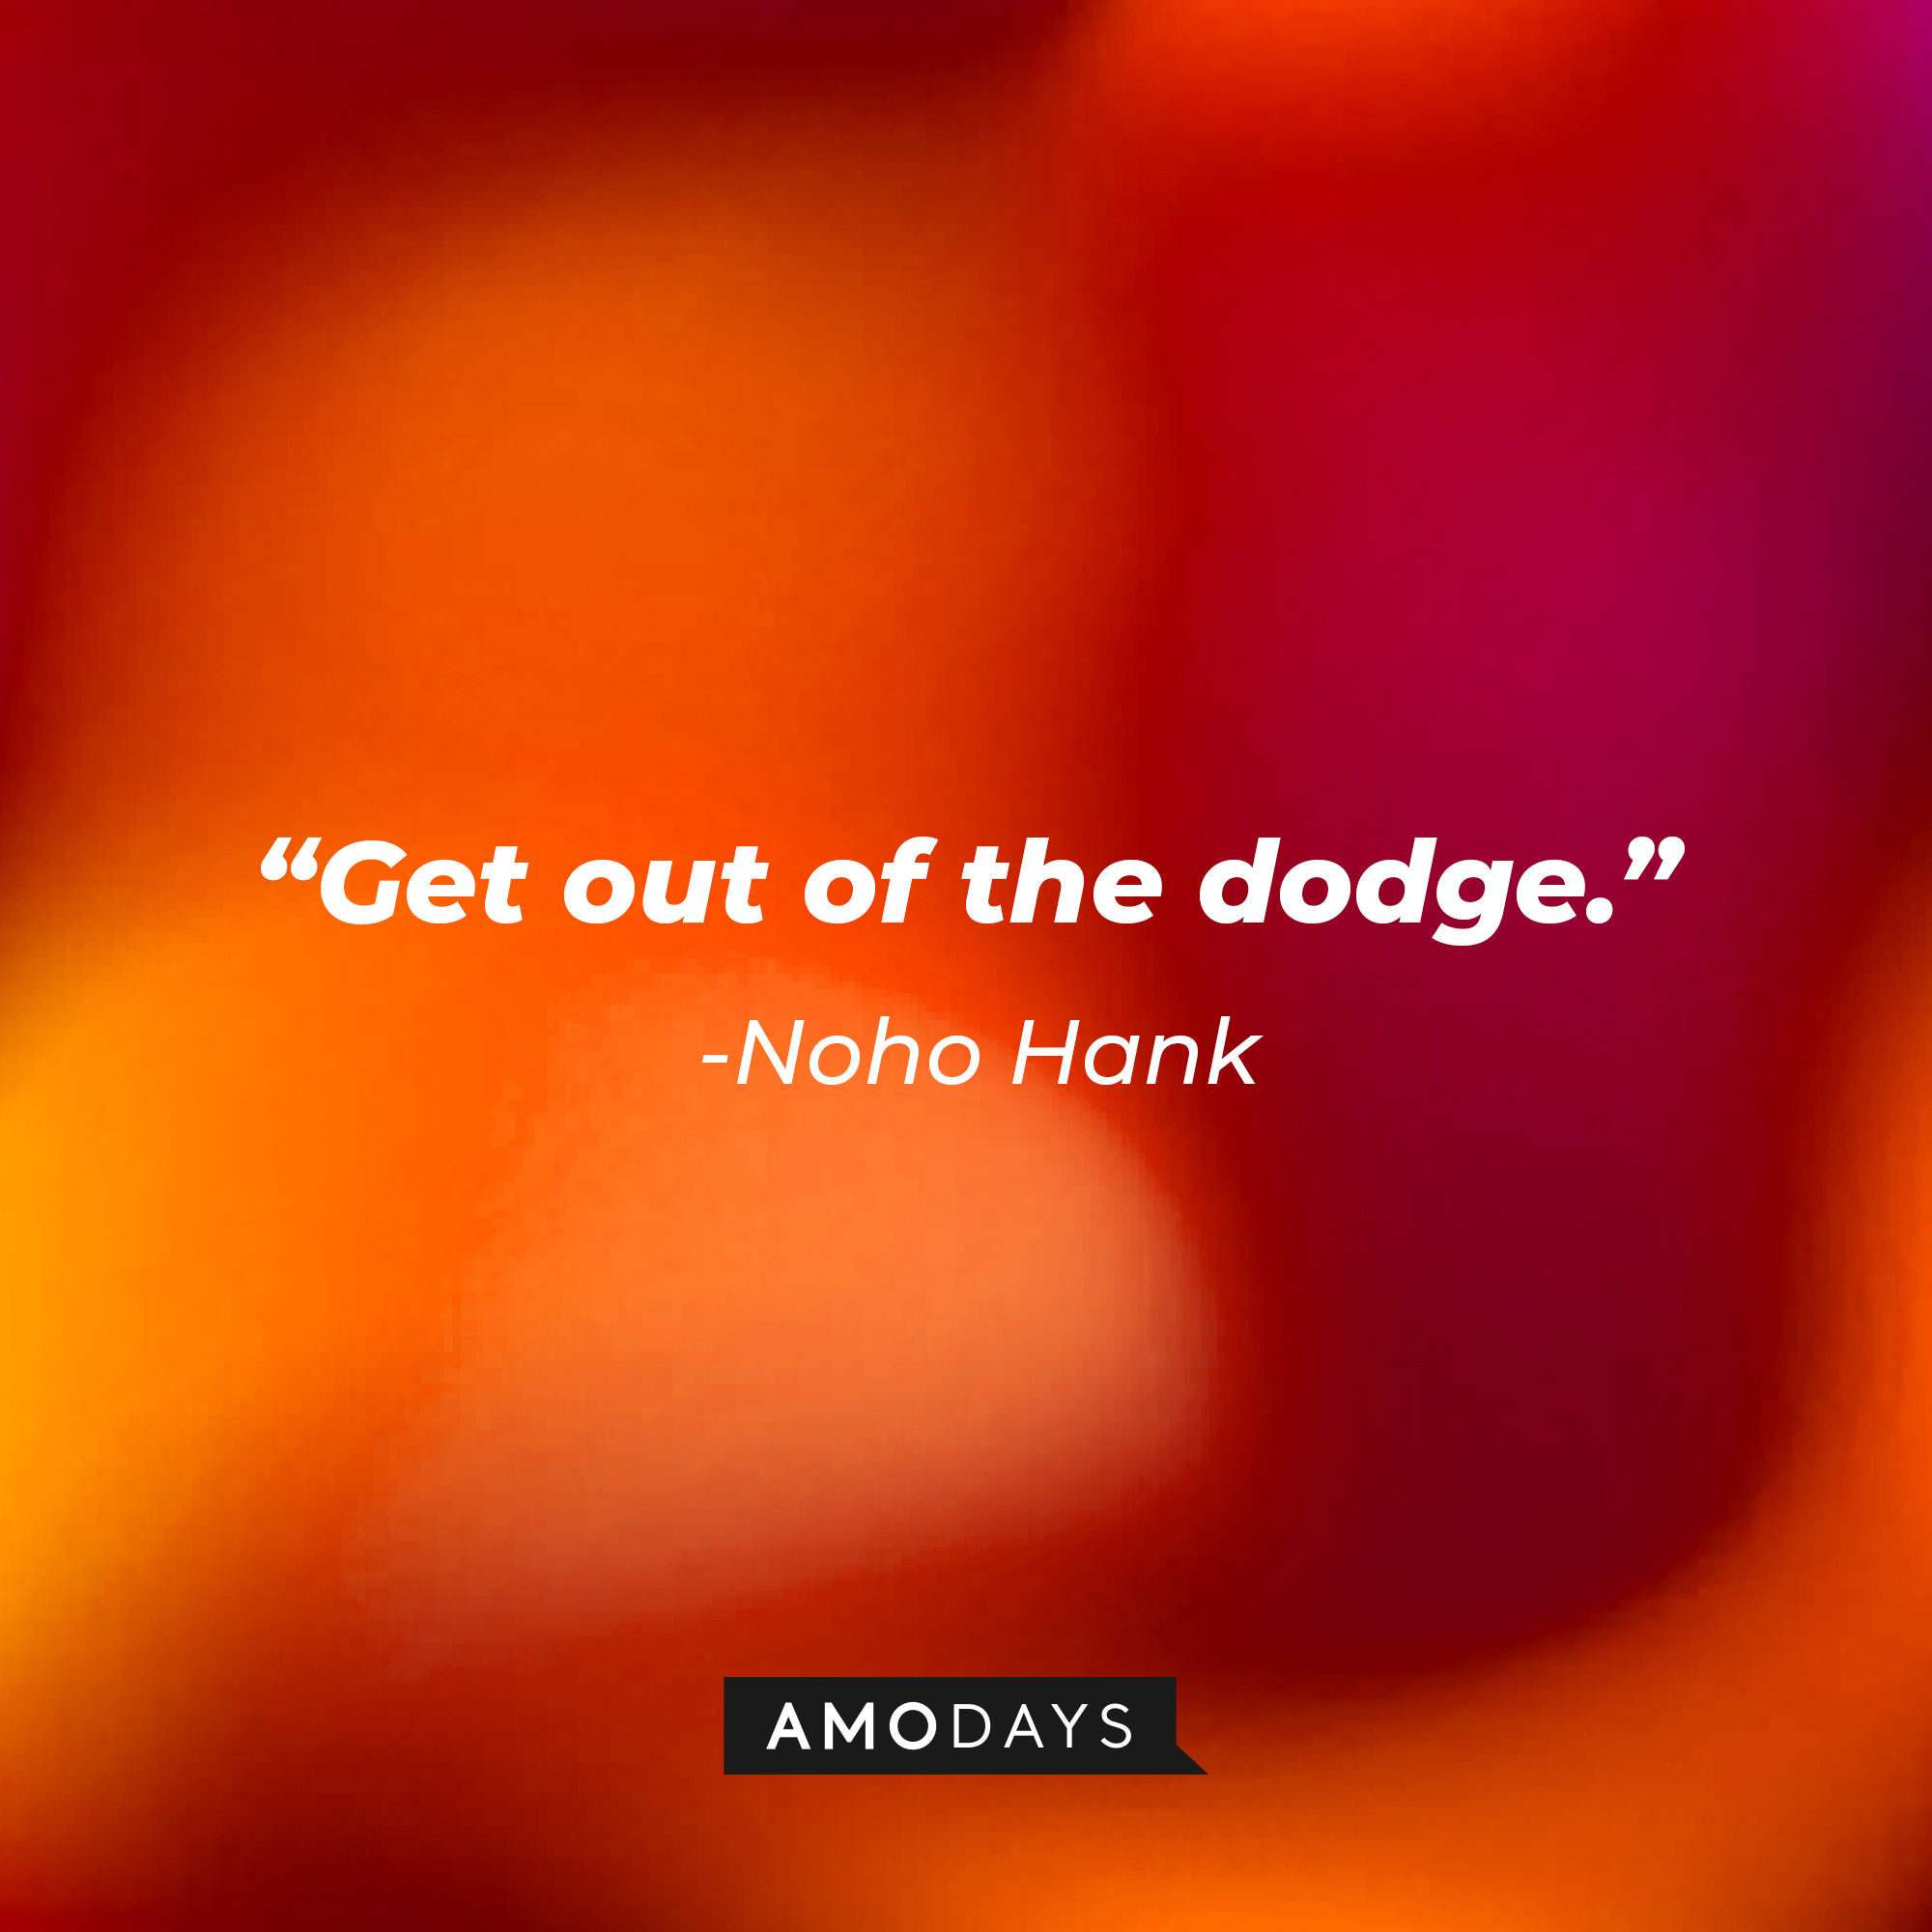 NoHo Hank's quote: “Get out of the dodge.” | Source: AmoDays